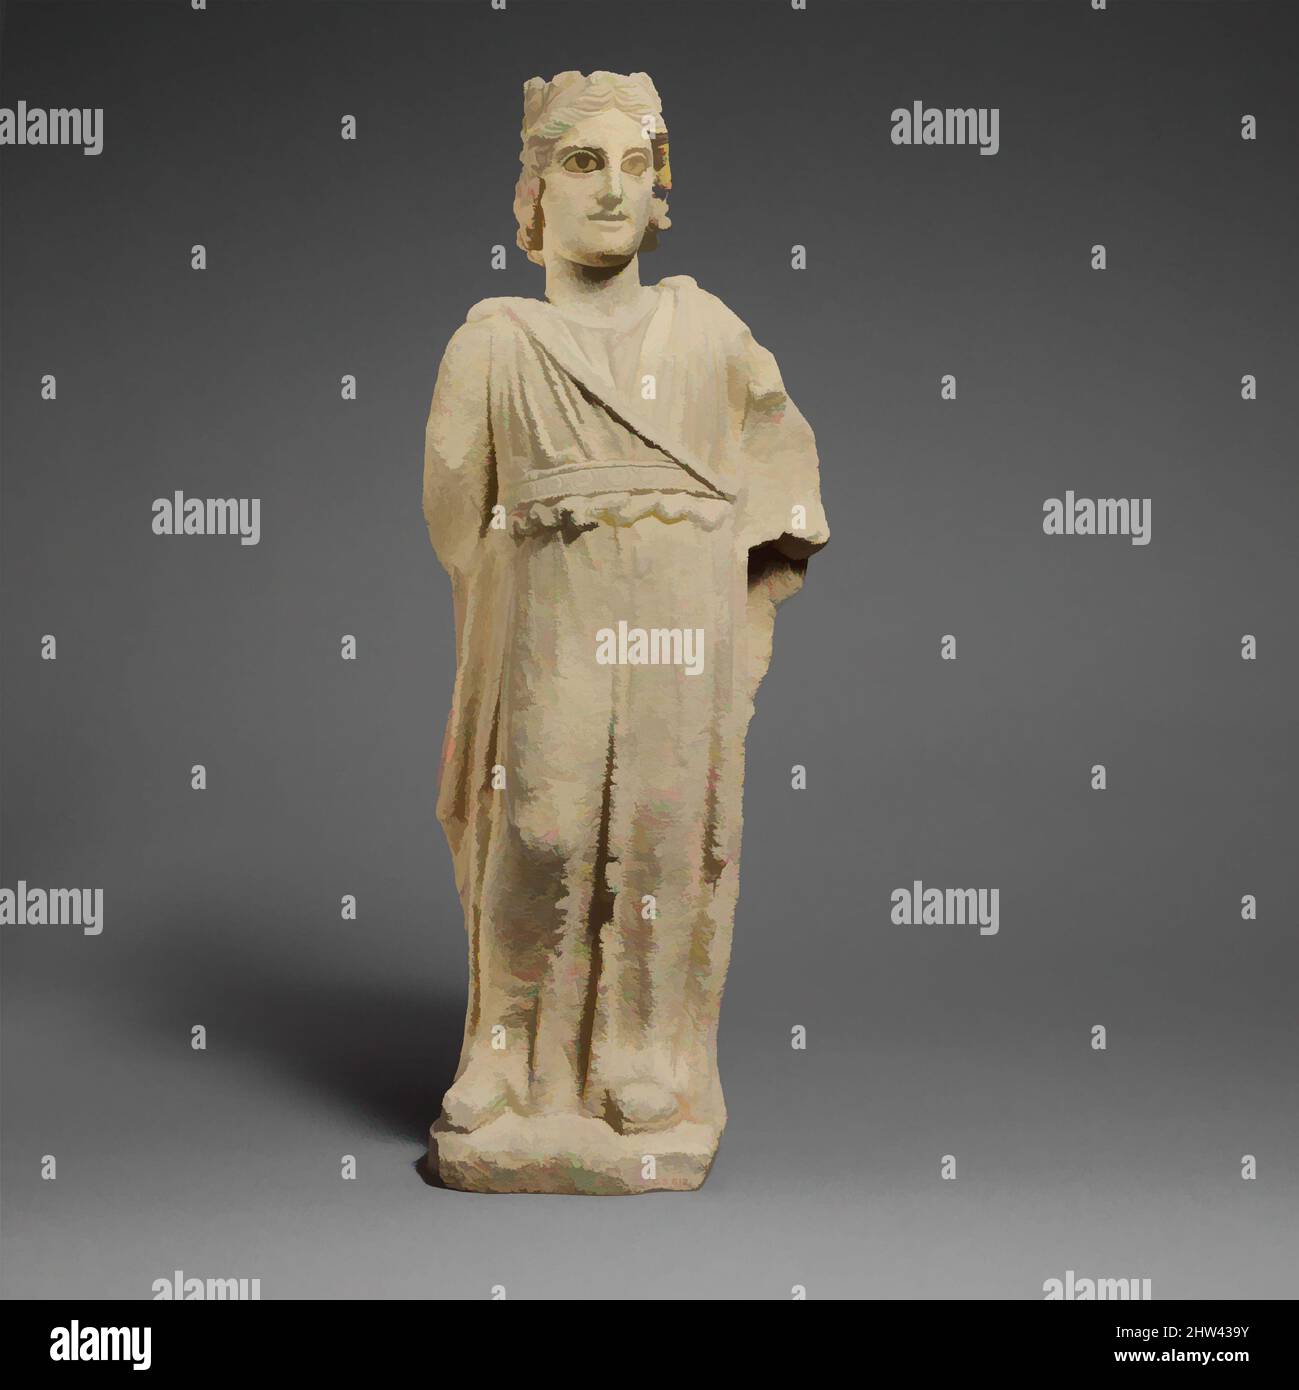 Art inspired by Limestone statue of Apollo, Hellenistic, ca. 3rd–1st century B.C., Cypriot, Limestone, Overall: 21 x 8 in. (53.3 x 20.3 cm), Stone Sculpture, The figure can be identified as the god Apollo. His hairstyle, with a knot above the forehead, is that of Apollo Lykeios, and he, Classic works modernized by Artotop with a splash of modernity. Shapes, color and value, eye-catching visual impact on art. Emotions through freedom of artworks in a contemporary way. A timeless message pursuing a wildly creative new direction. Artists turning to the digital medium and creating the Artotop NFT Stock Photo